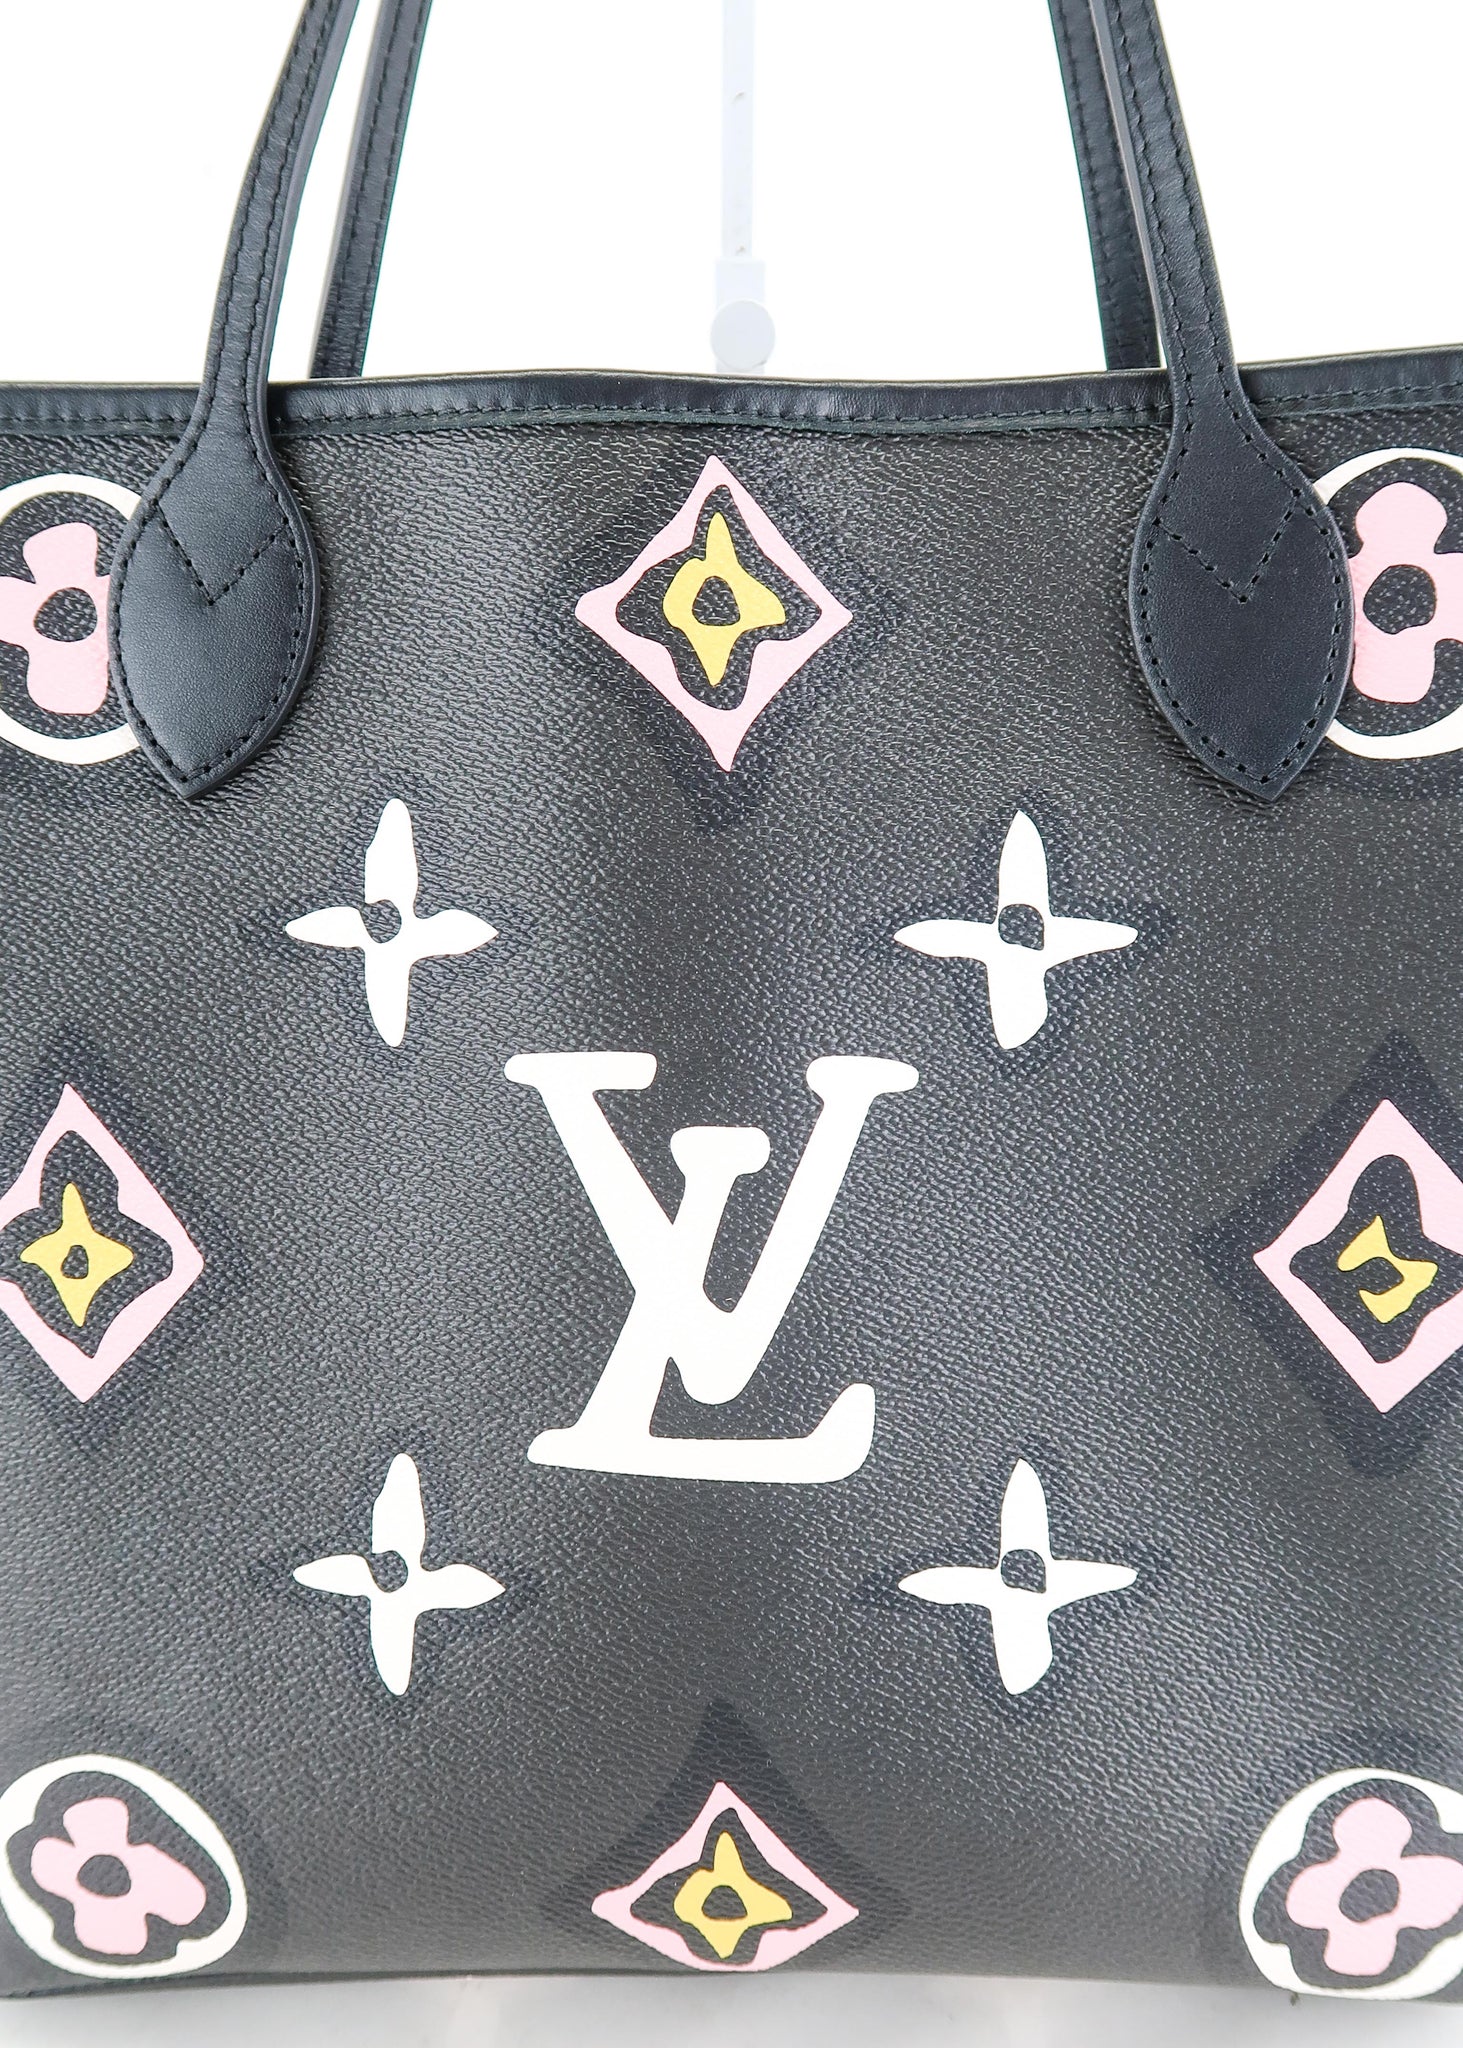 Louis Vuitton OnTheGo GM Wild at Heart collection BRAND-NEW